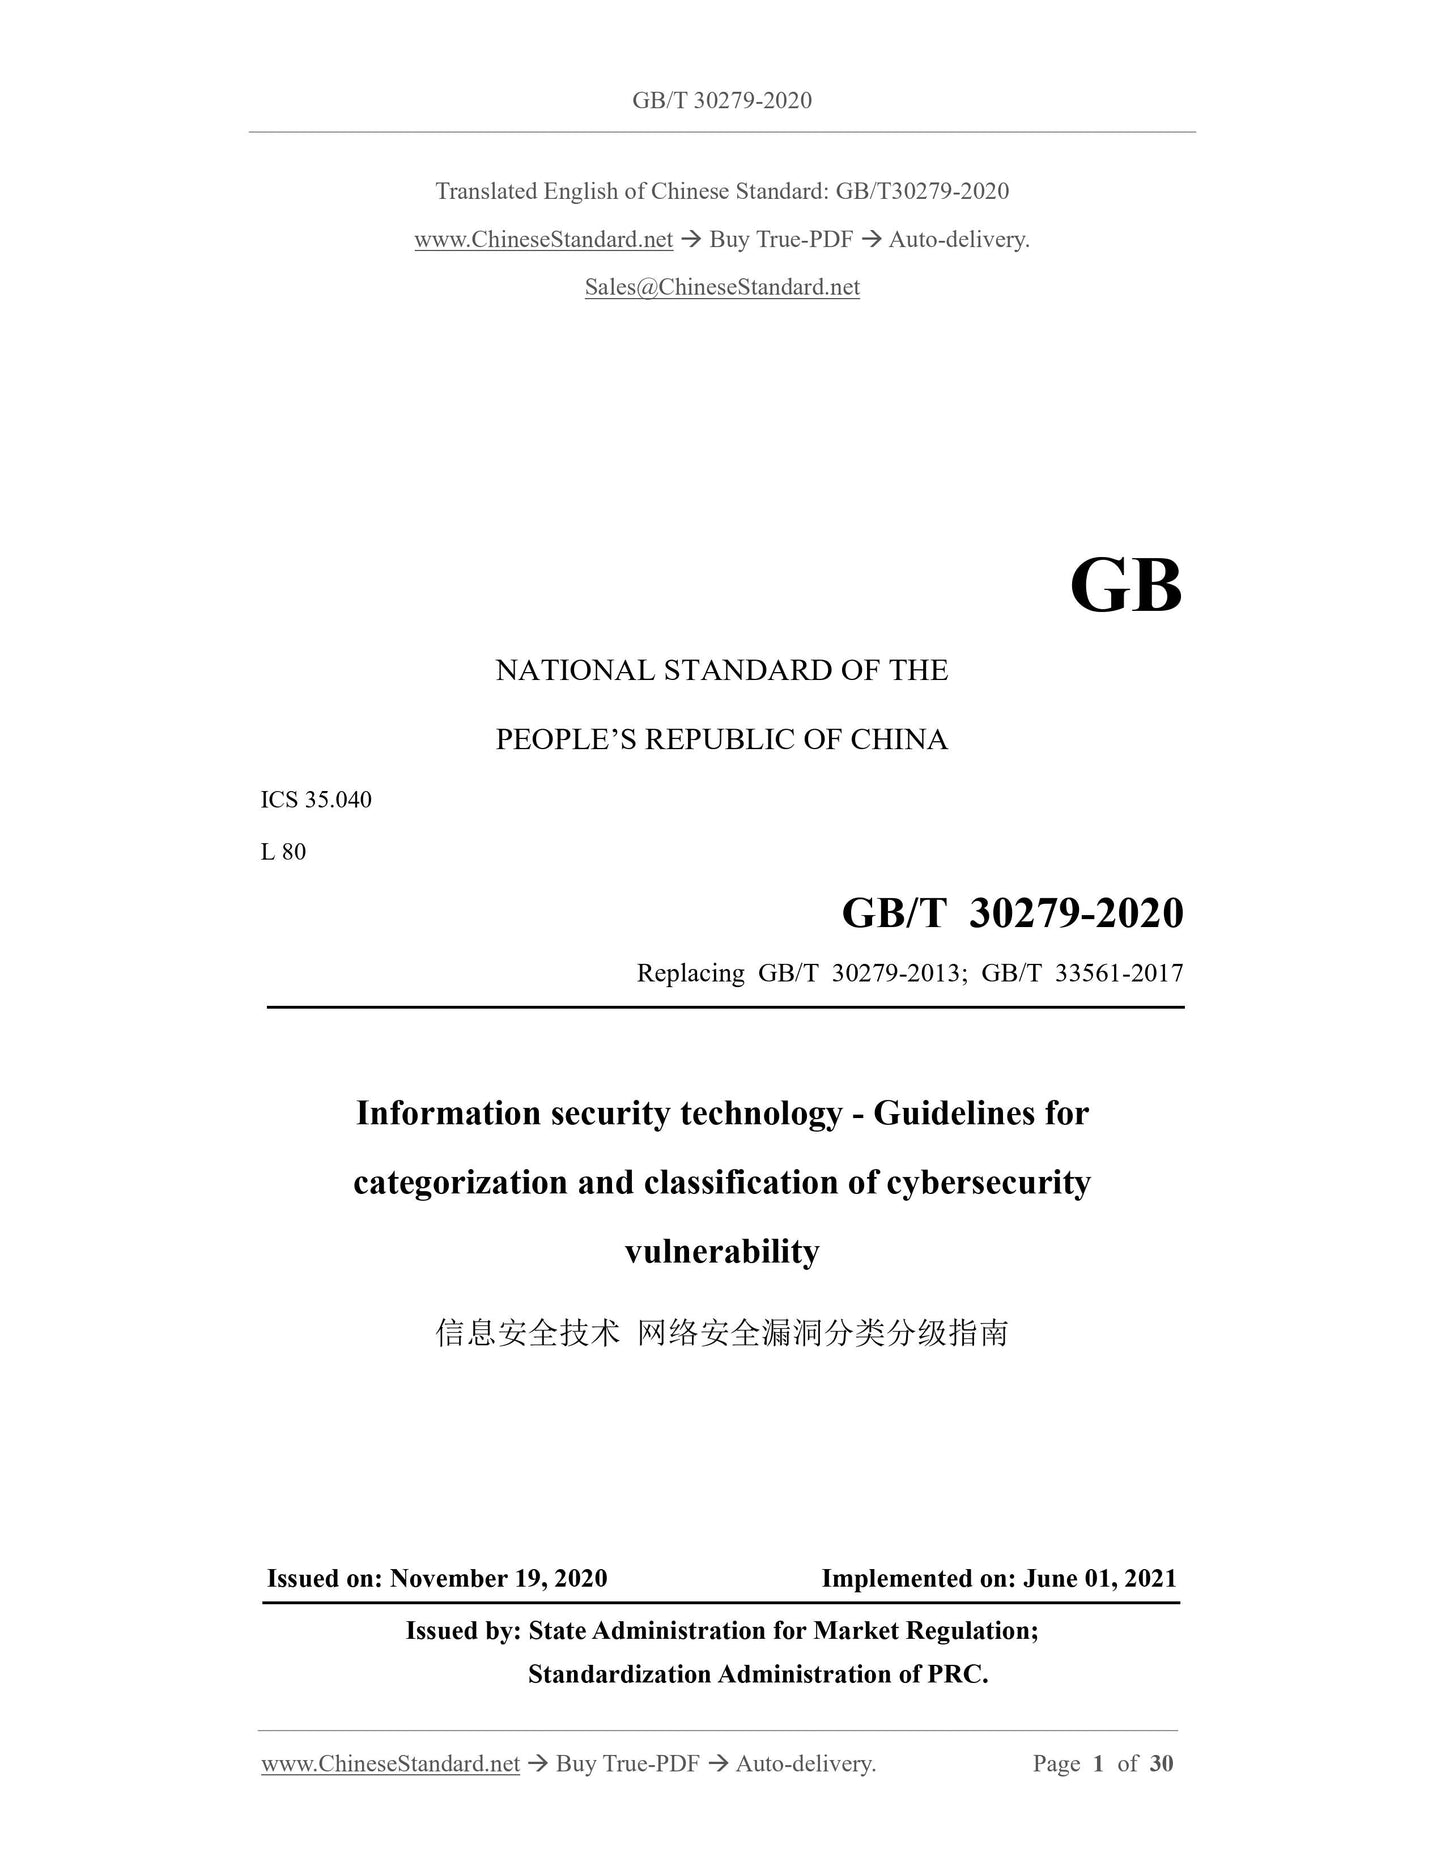 GB/T 30279-2020 Page 1